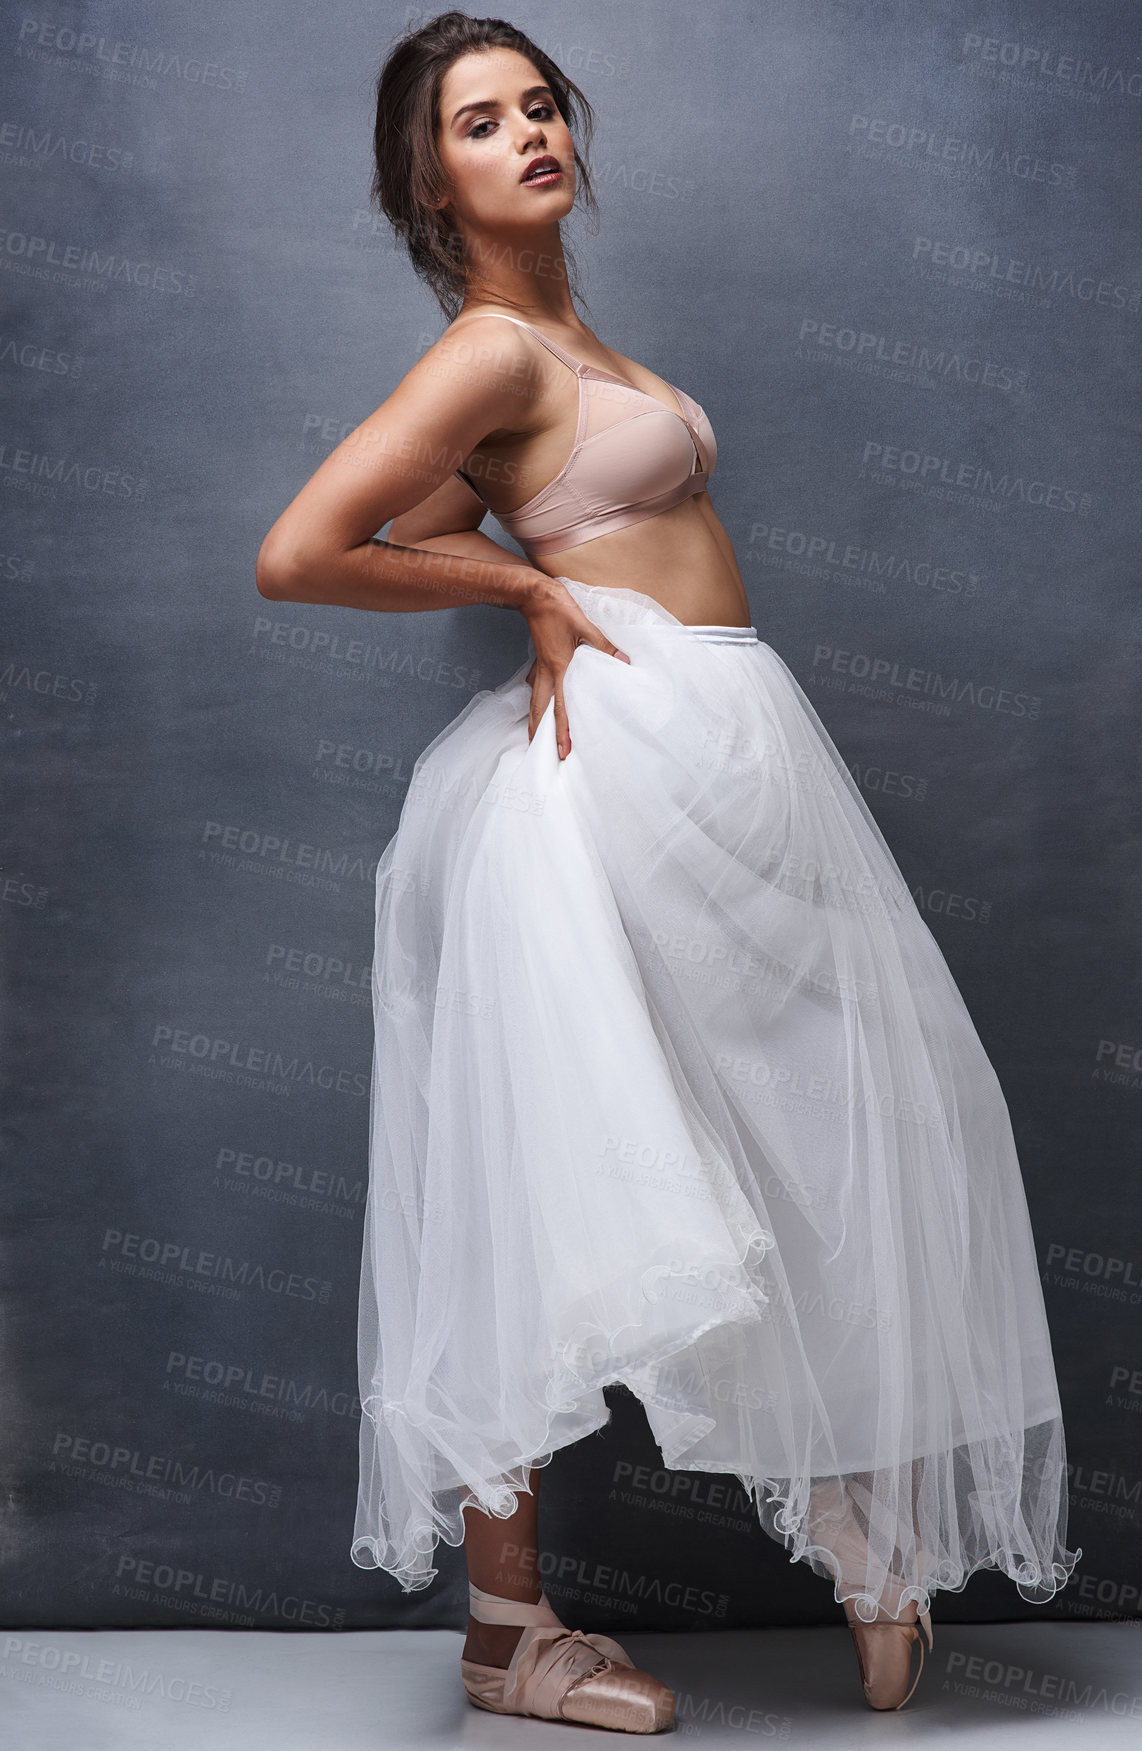 Buy stock photo Portrait of a beautiful young woman posing in studio while wearing a bra and ballet skirt